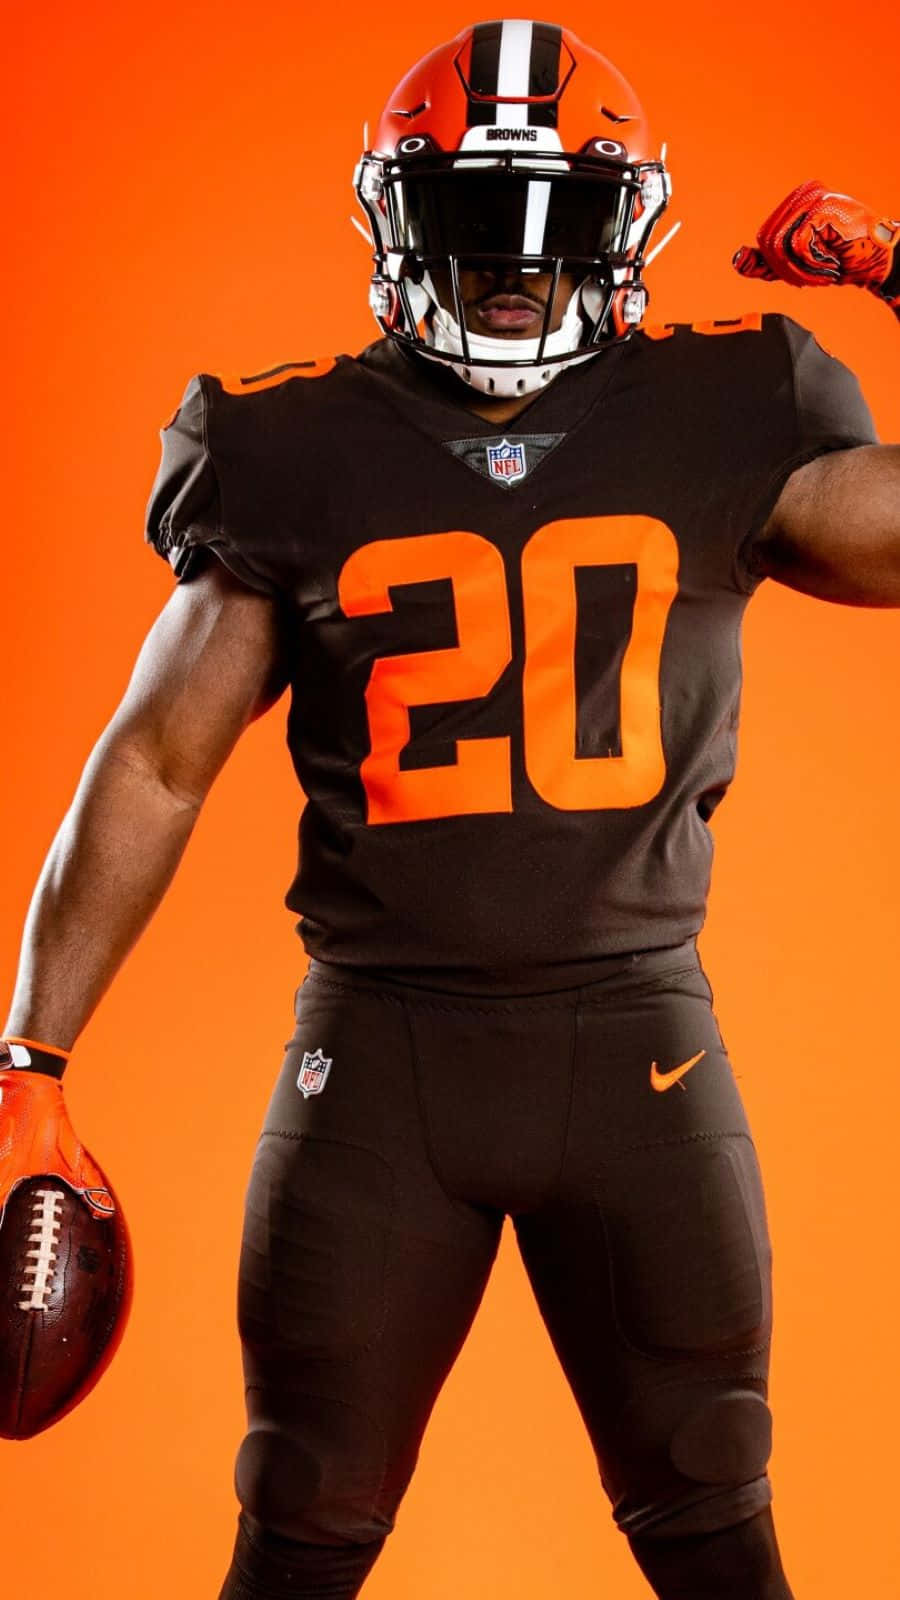 Cleveland Browns Player Number20 Wallpaper